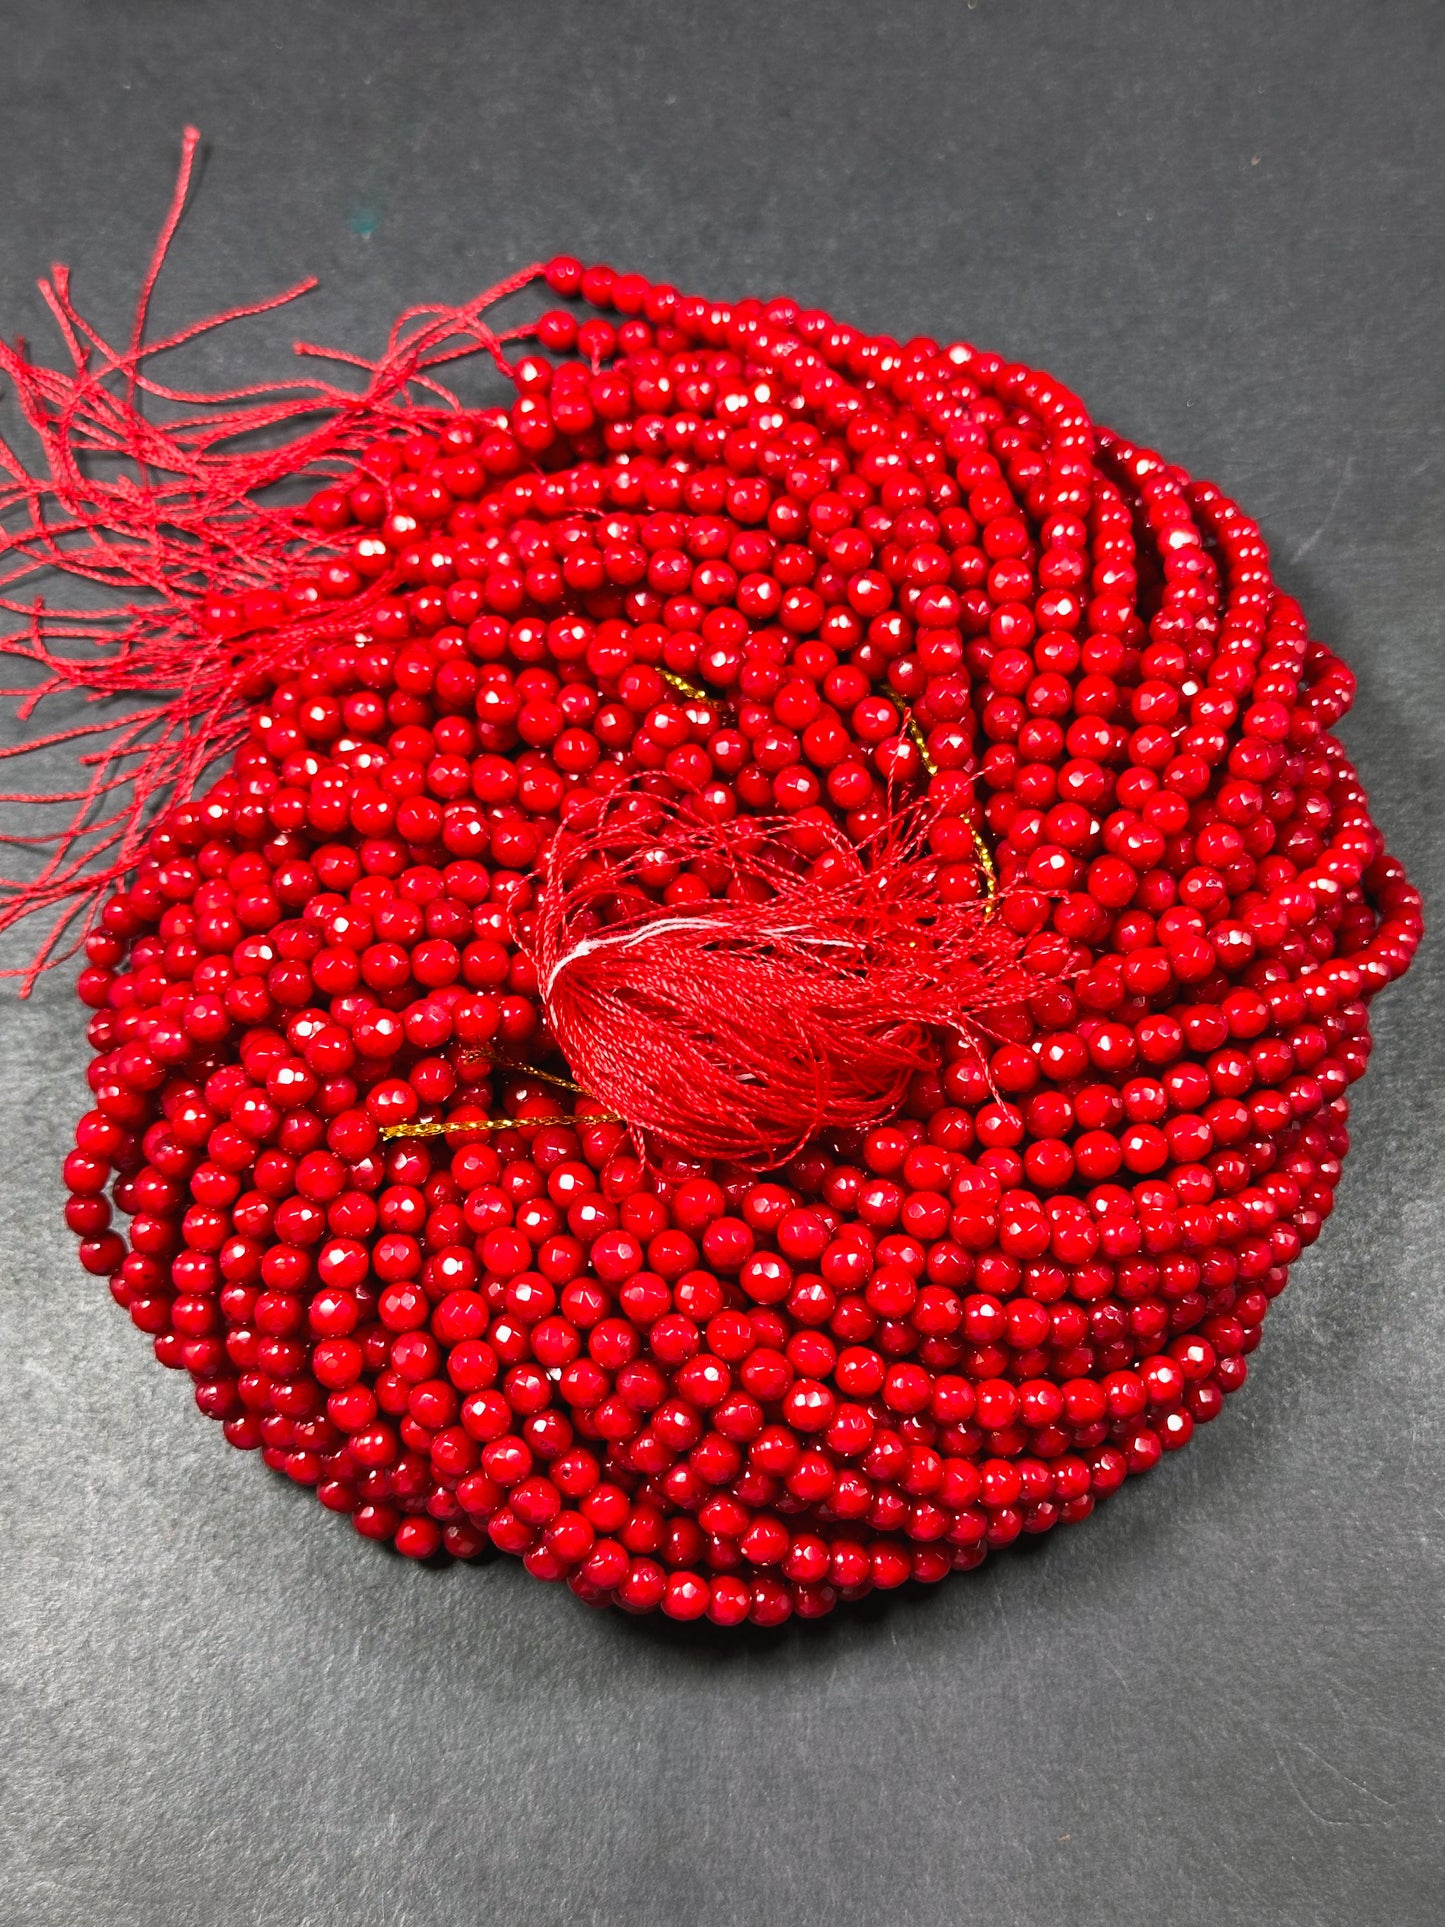 Natural Red Coral Gemstone Bead Faceted 3mm 5mm Round Beads, Beautiful Natural Red Color Bamboo Coral Gemstone Beads, Great Quality 15.5"